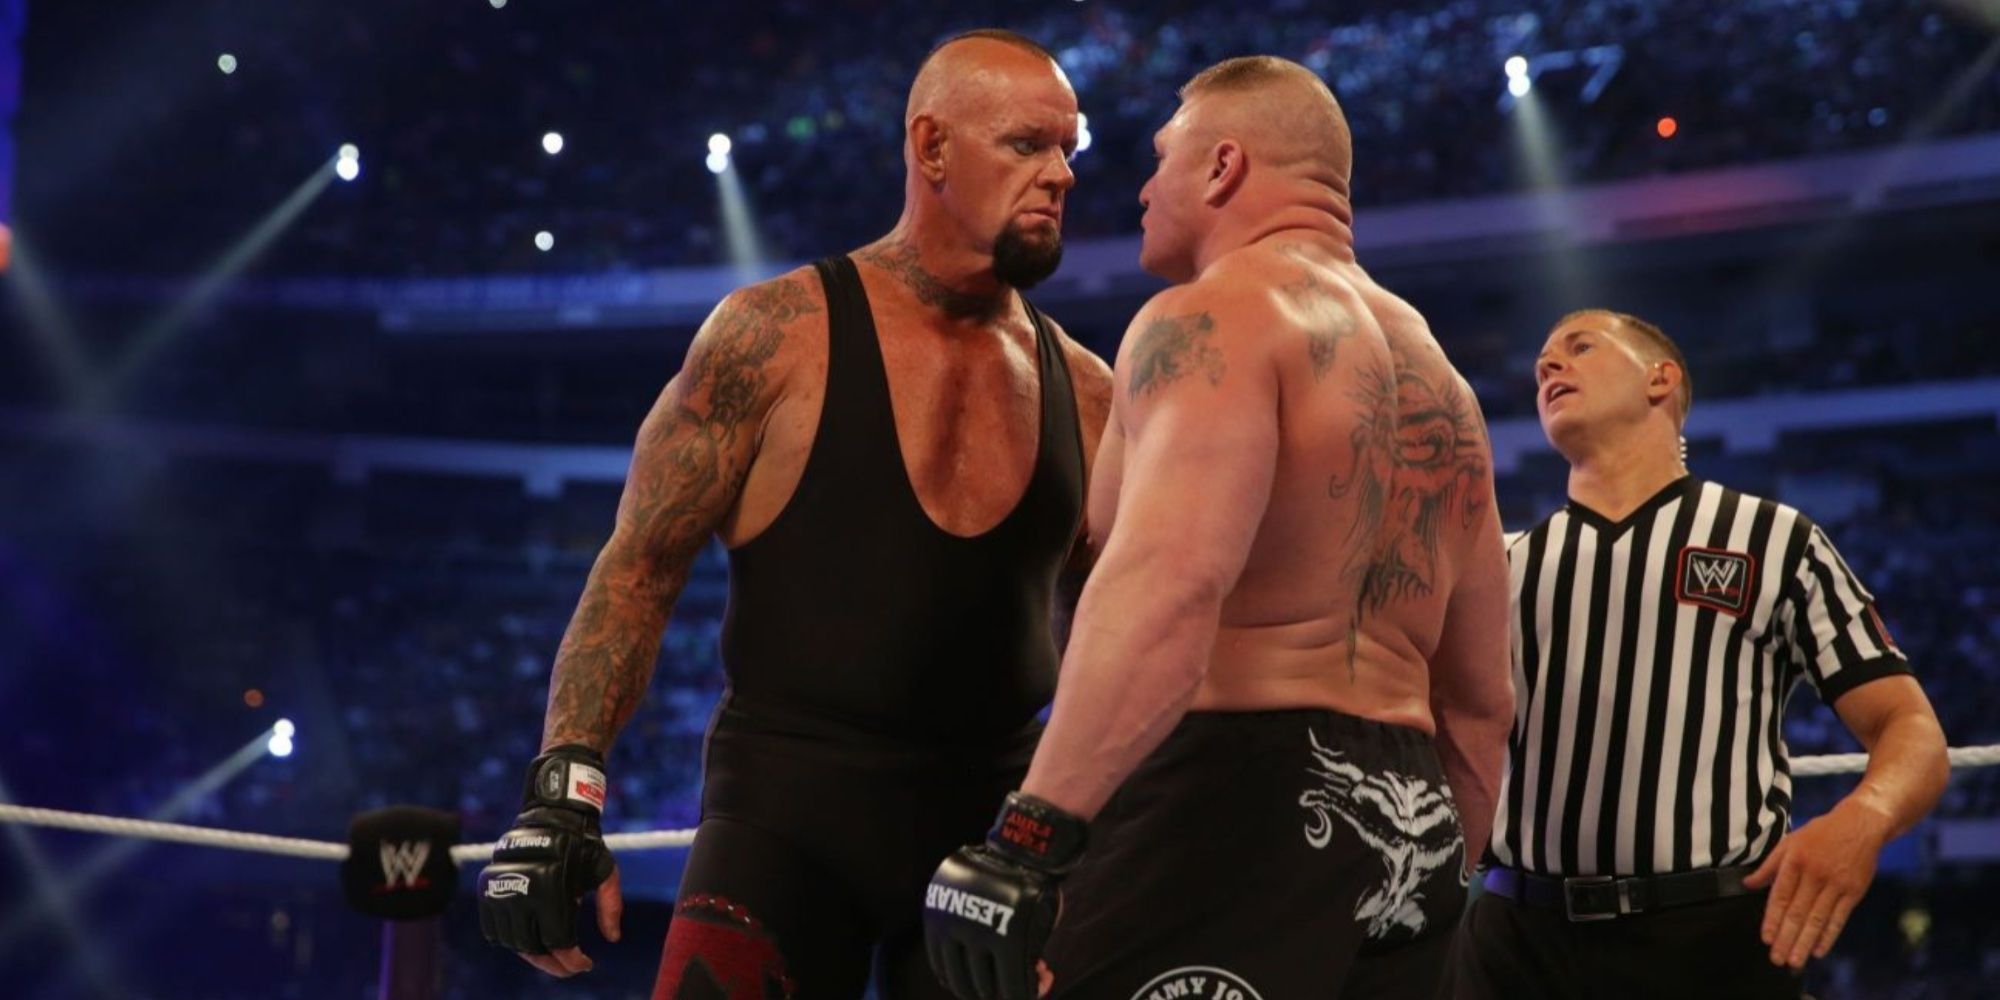 the undertaker squaring up to brock lesnar